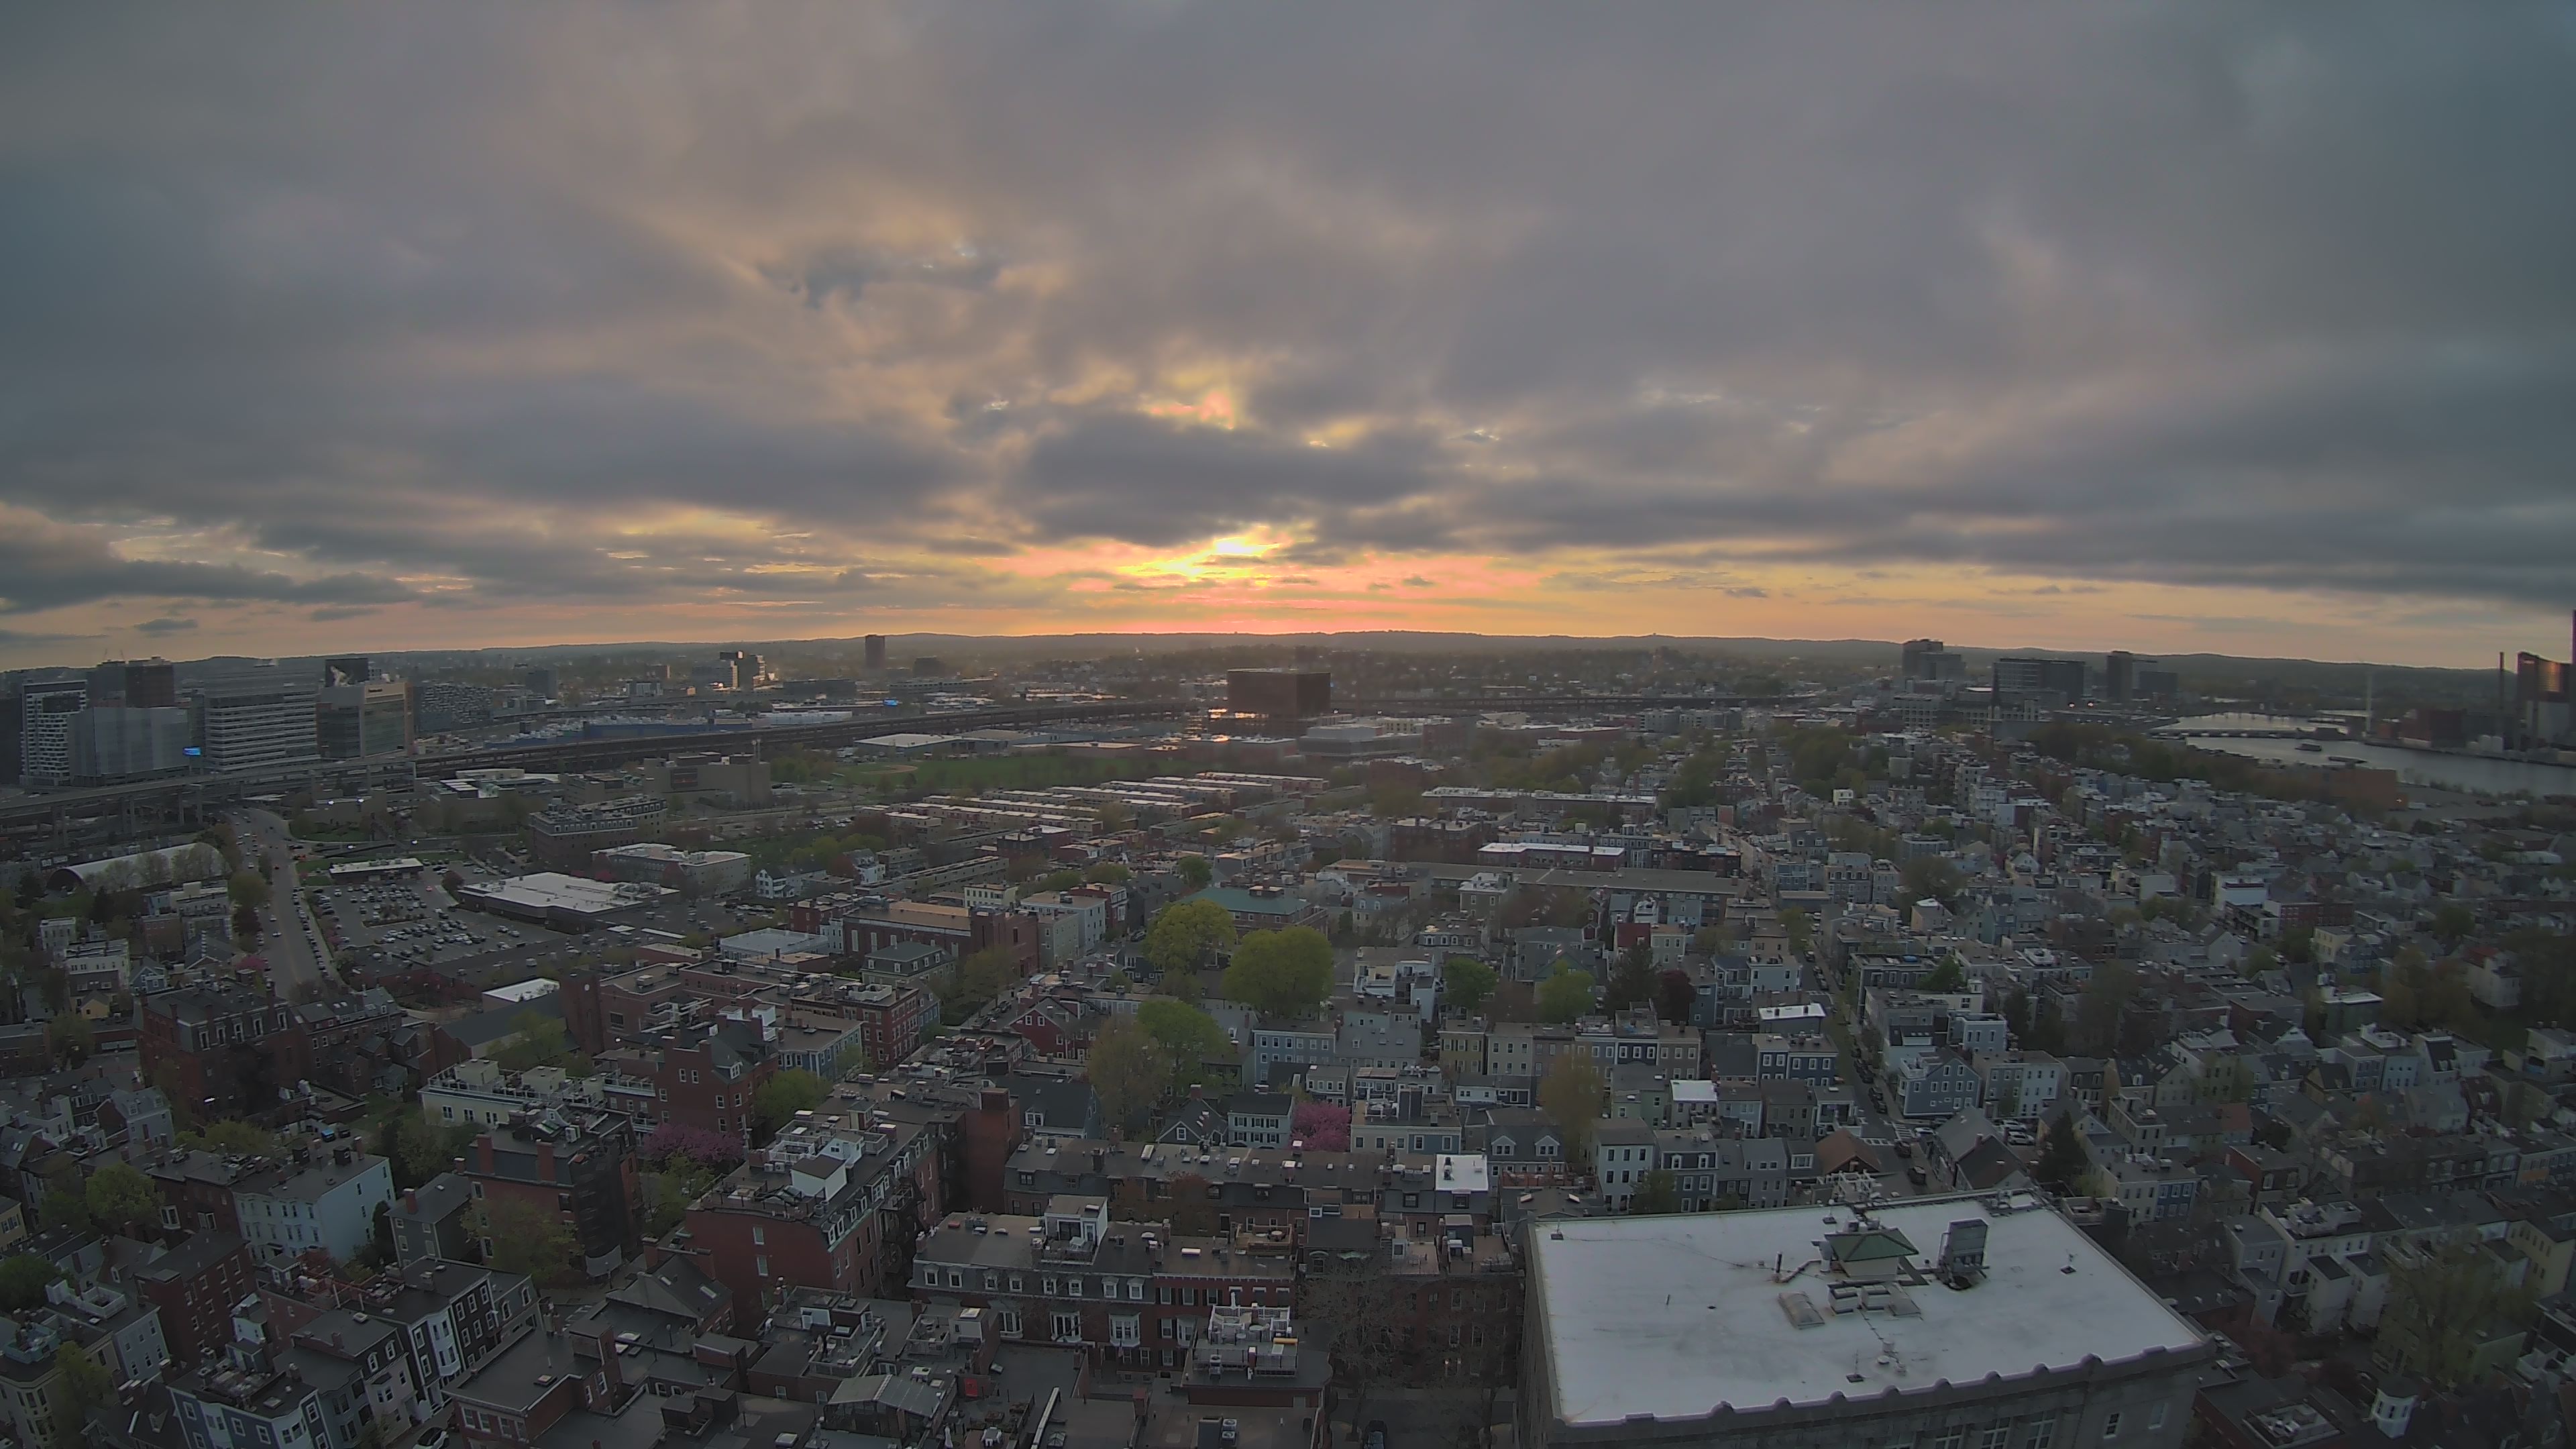 Webcam view from the Bunker Hill Monument looking west